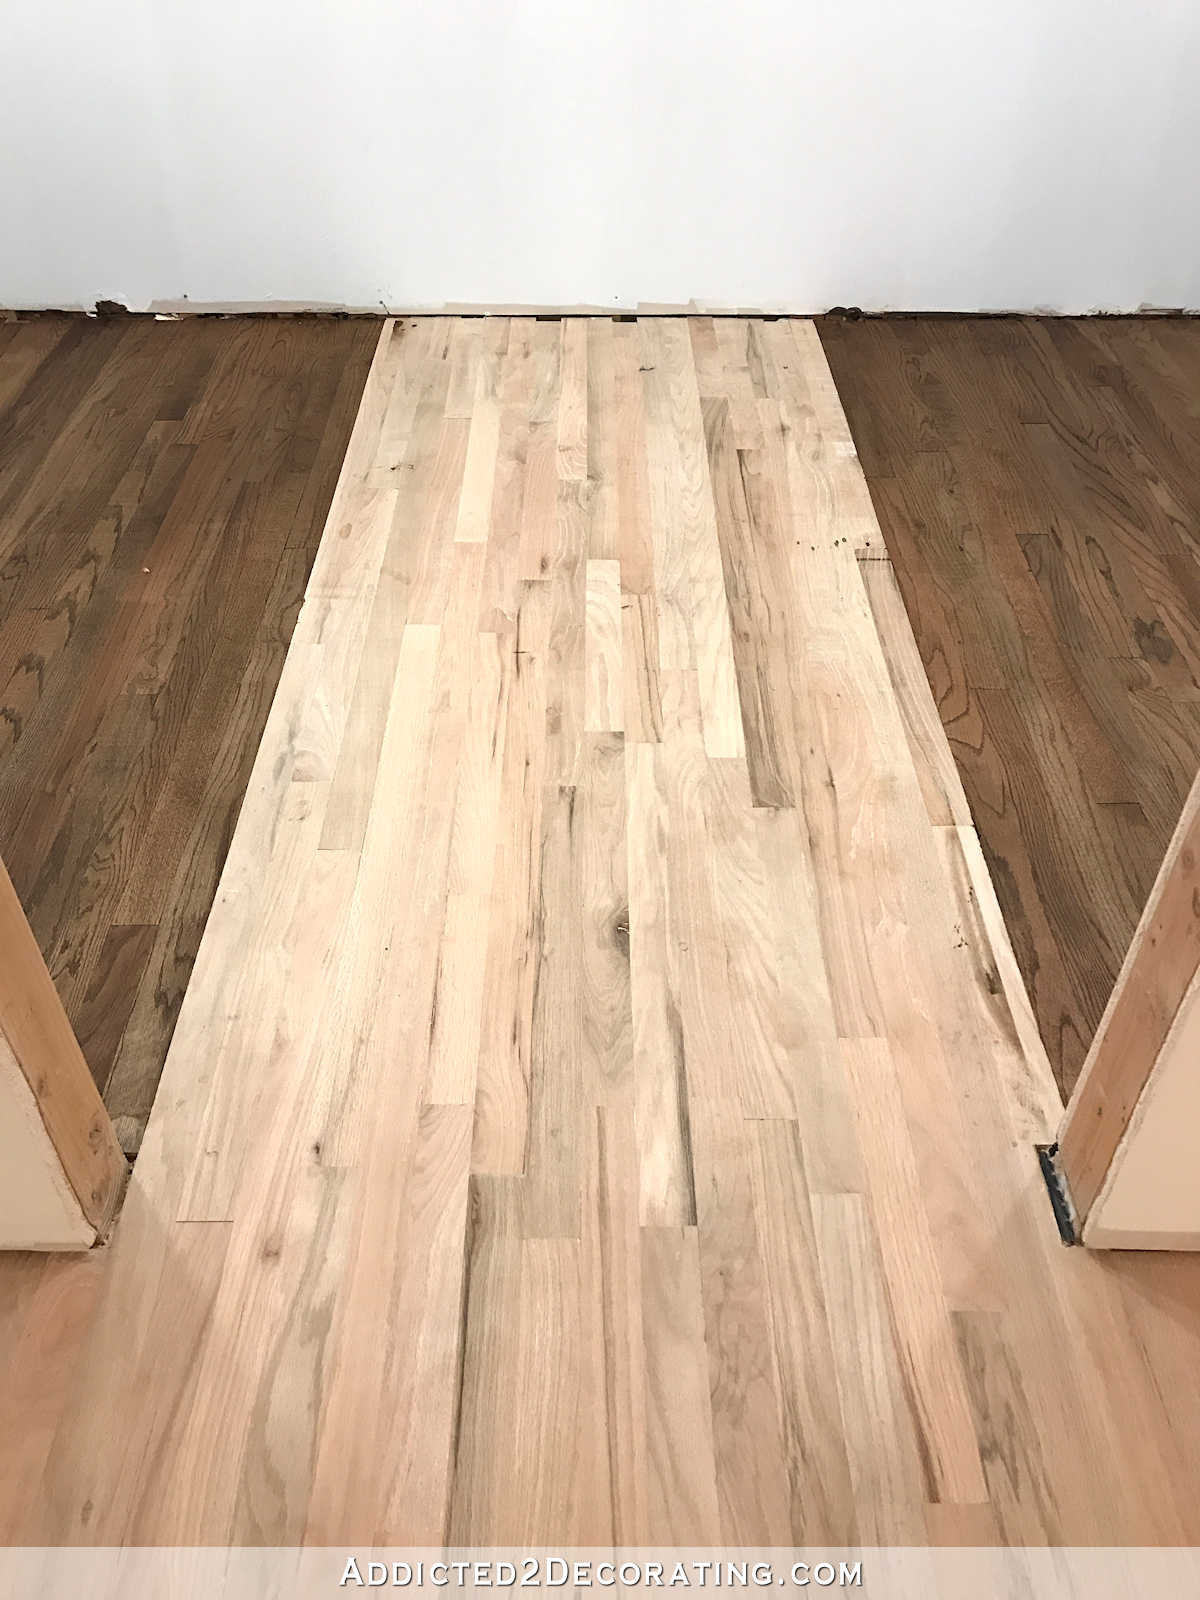 How to Finish An Unfinished Hardwood Floor Of Adventures In Staining My Red Oak Hardwood Floors Products Process within Staining Red Oak Hardwood Floors 11 Stain On Left and Right Sides Of the